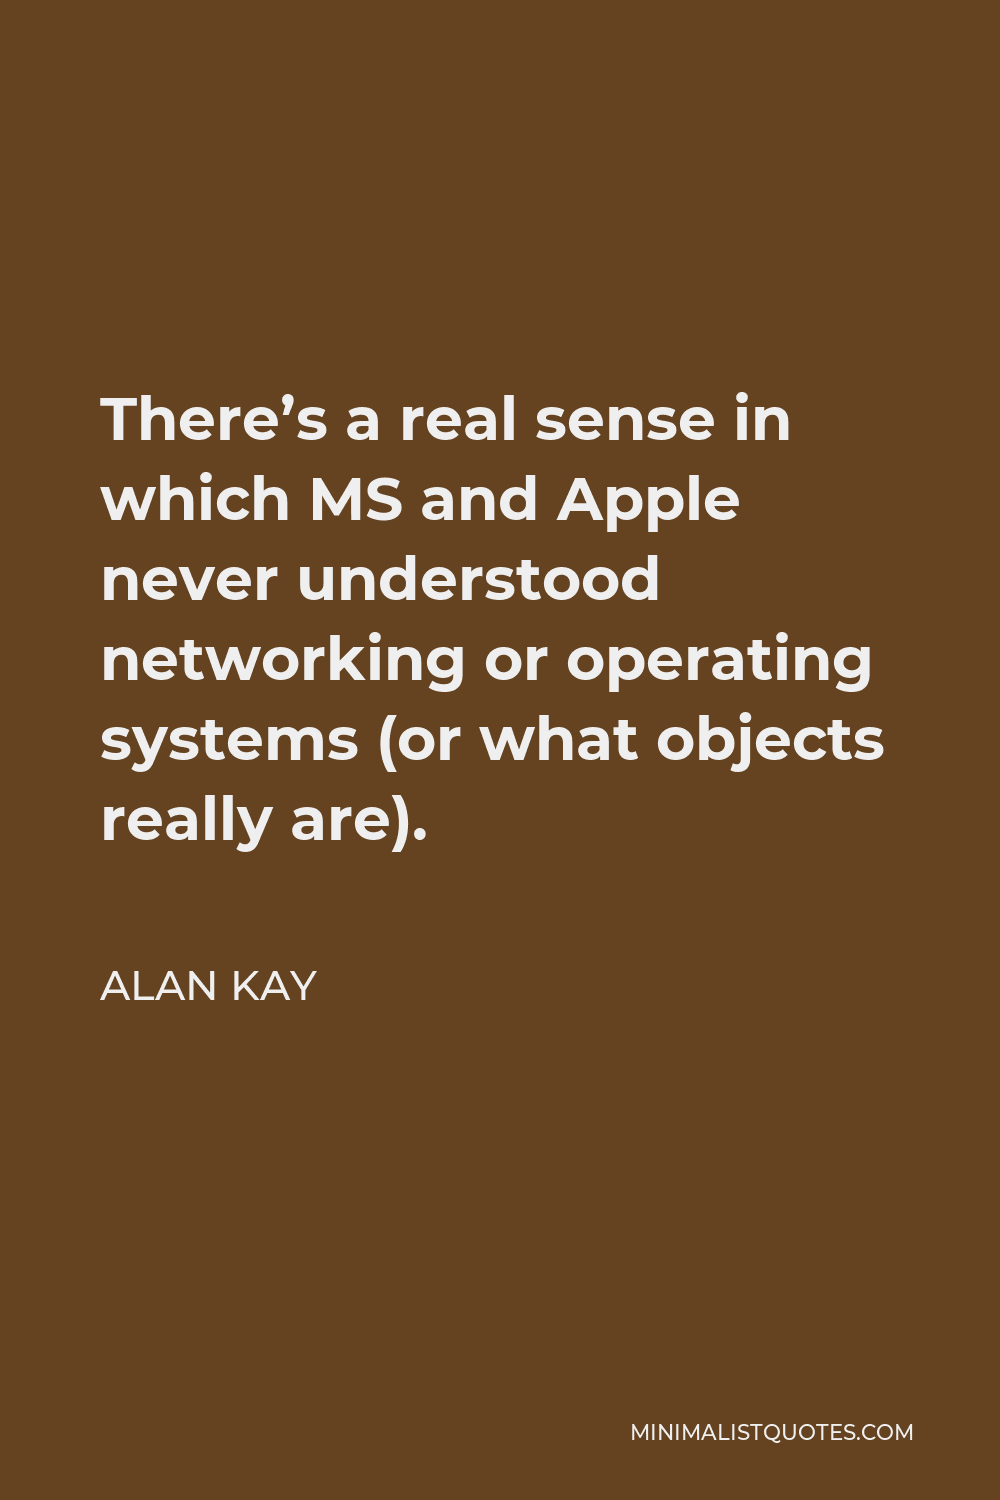 Alan Kay Quote - There’s a real sense in which MS and Apple never understood networking or operating systems (or what objects really are).